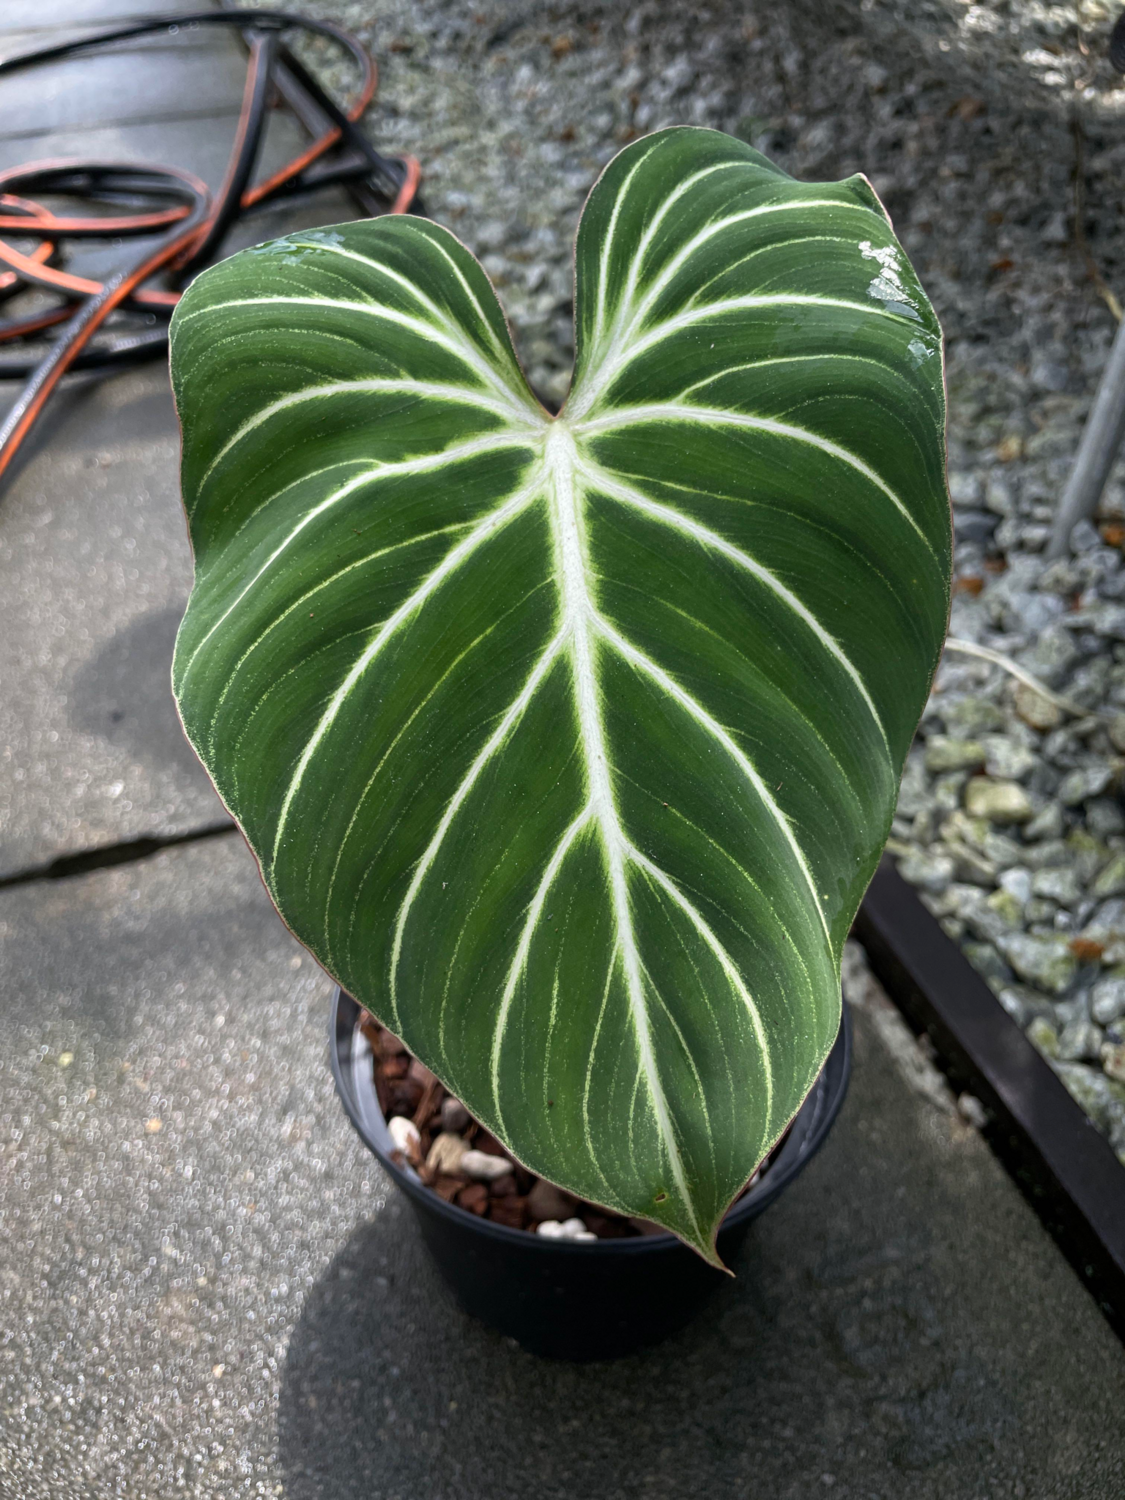 Philodendron Gloriosum "pink" Show